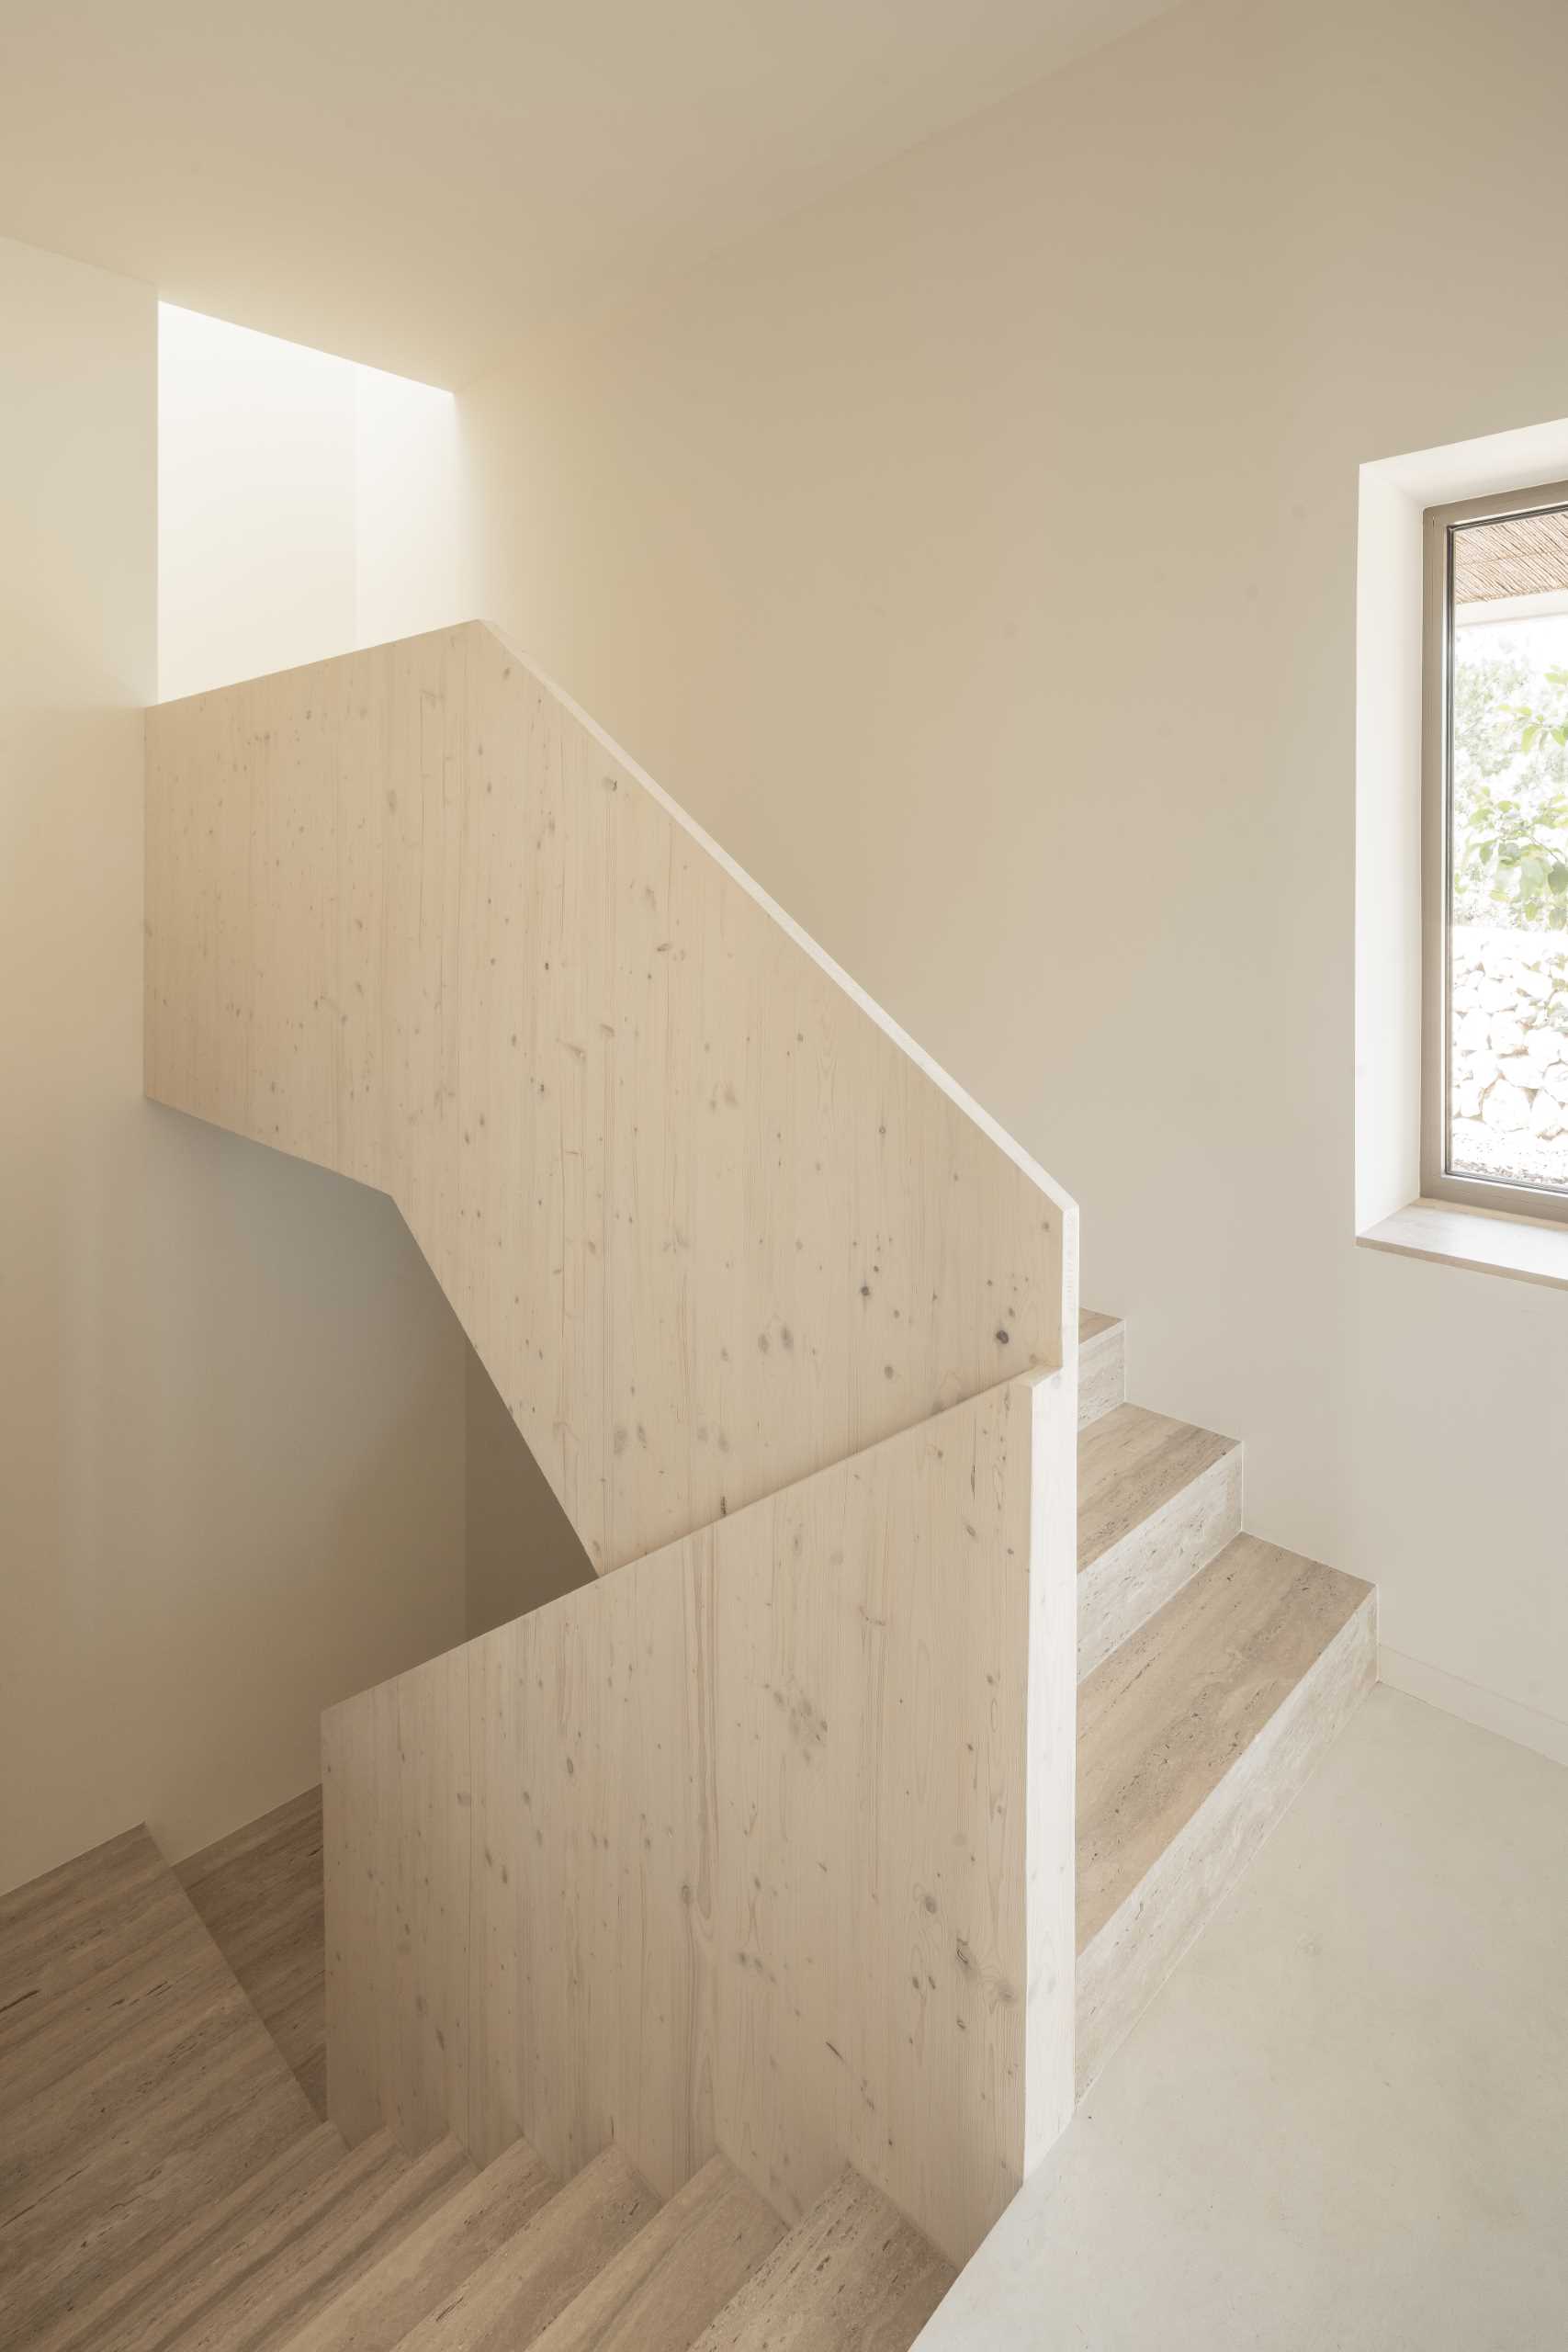 A modern ،me with travertine steps that are paired with simple white walls.